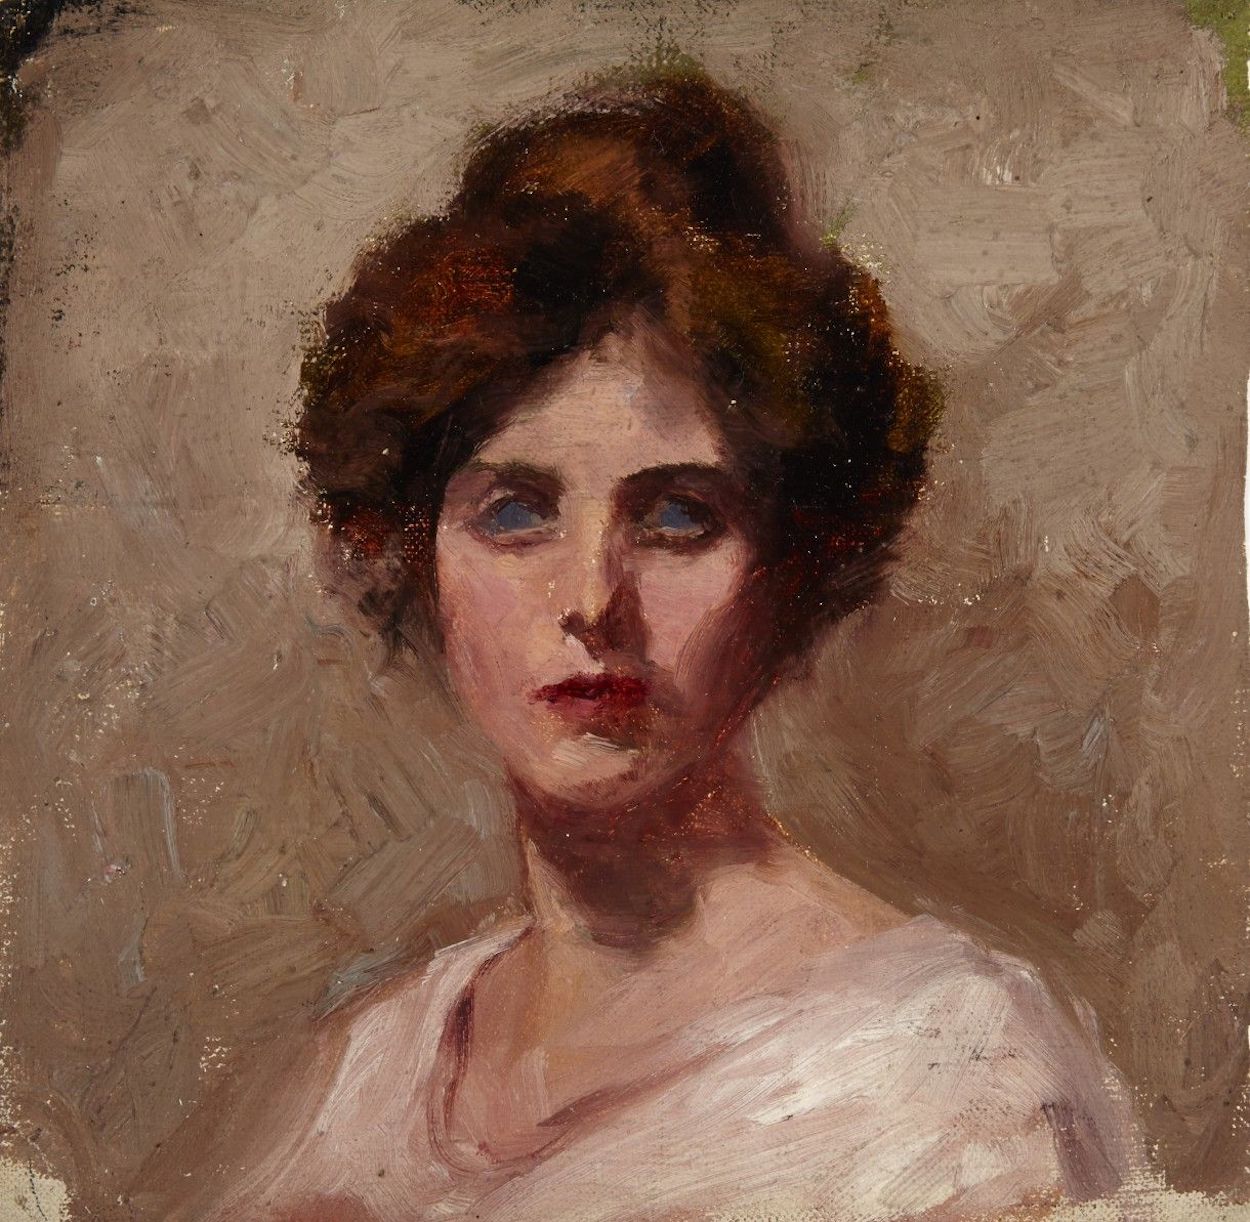 Self-Portrait by Bertha May Ingle - around 1902 - 17 x 17 cm private collection